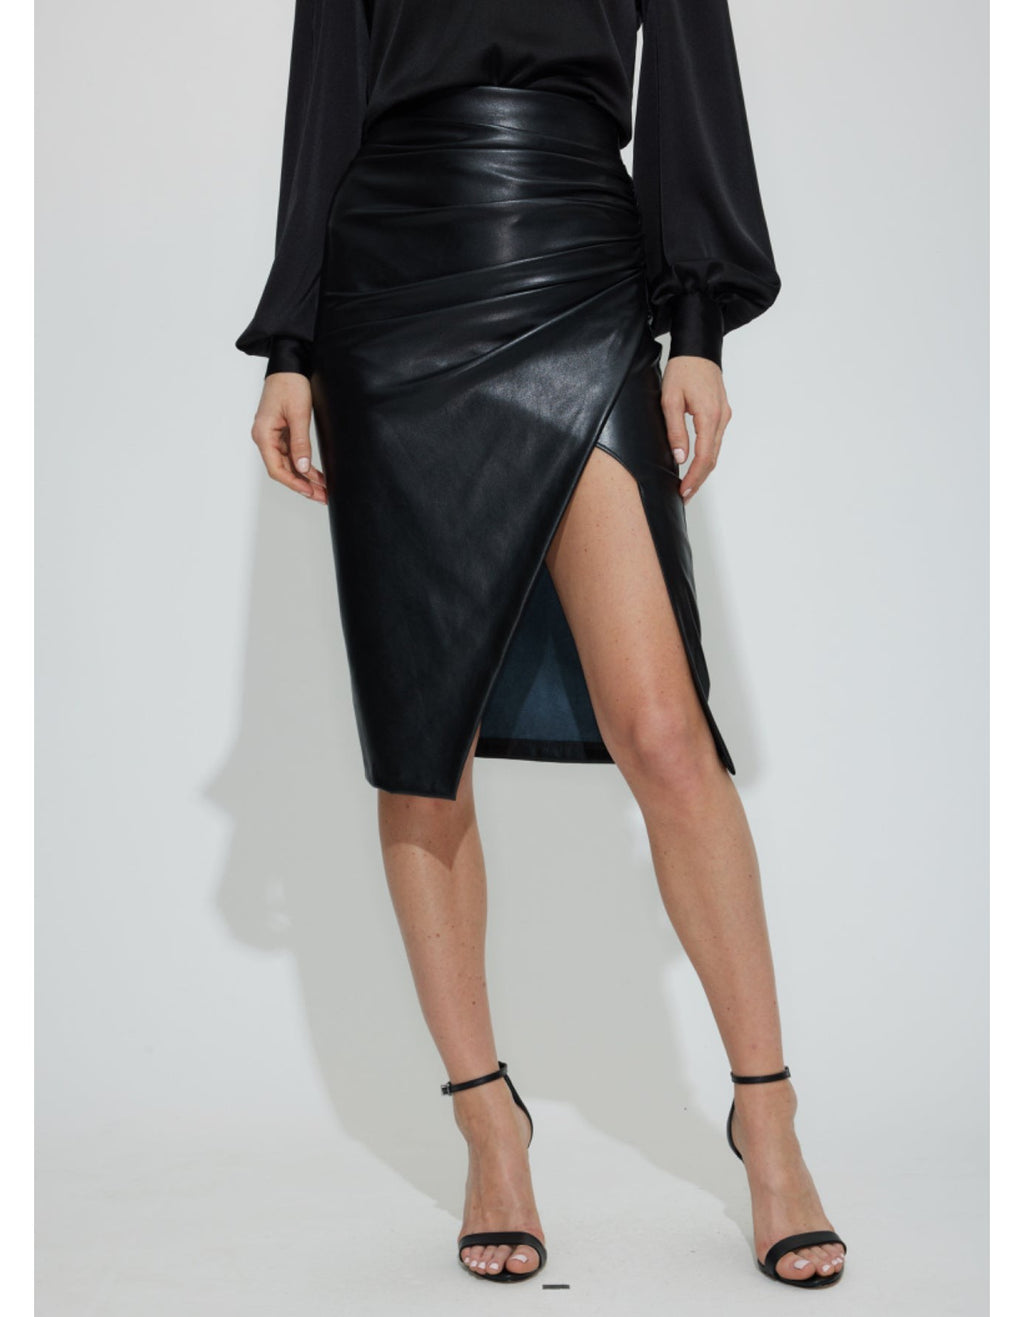 Gina Vegan Leather Skirt - Southern Muse Boutique